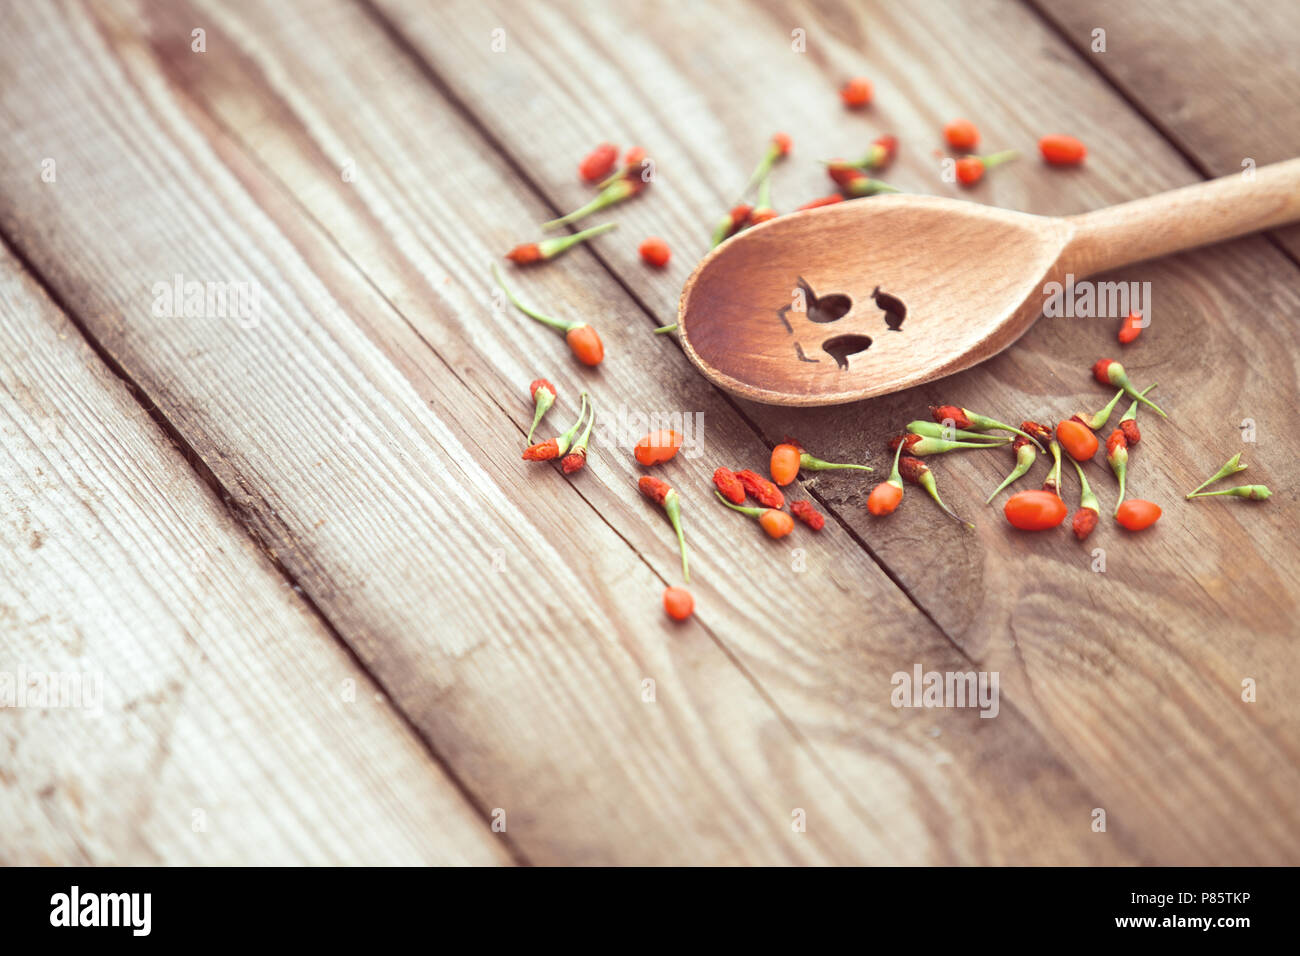 Goji berries on a wooden background Stock Photo